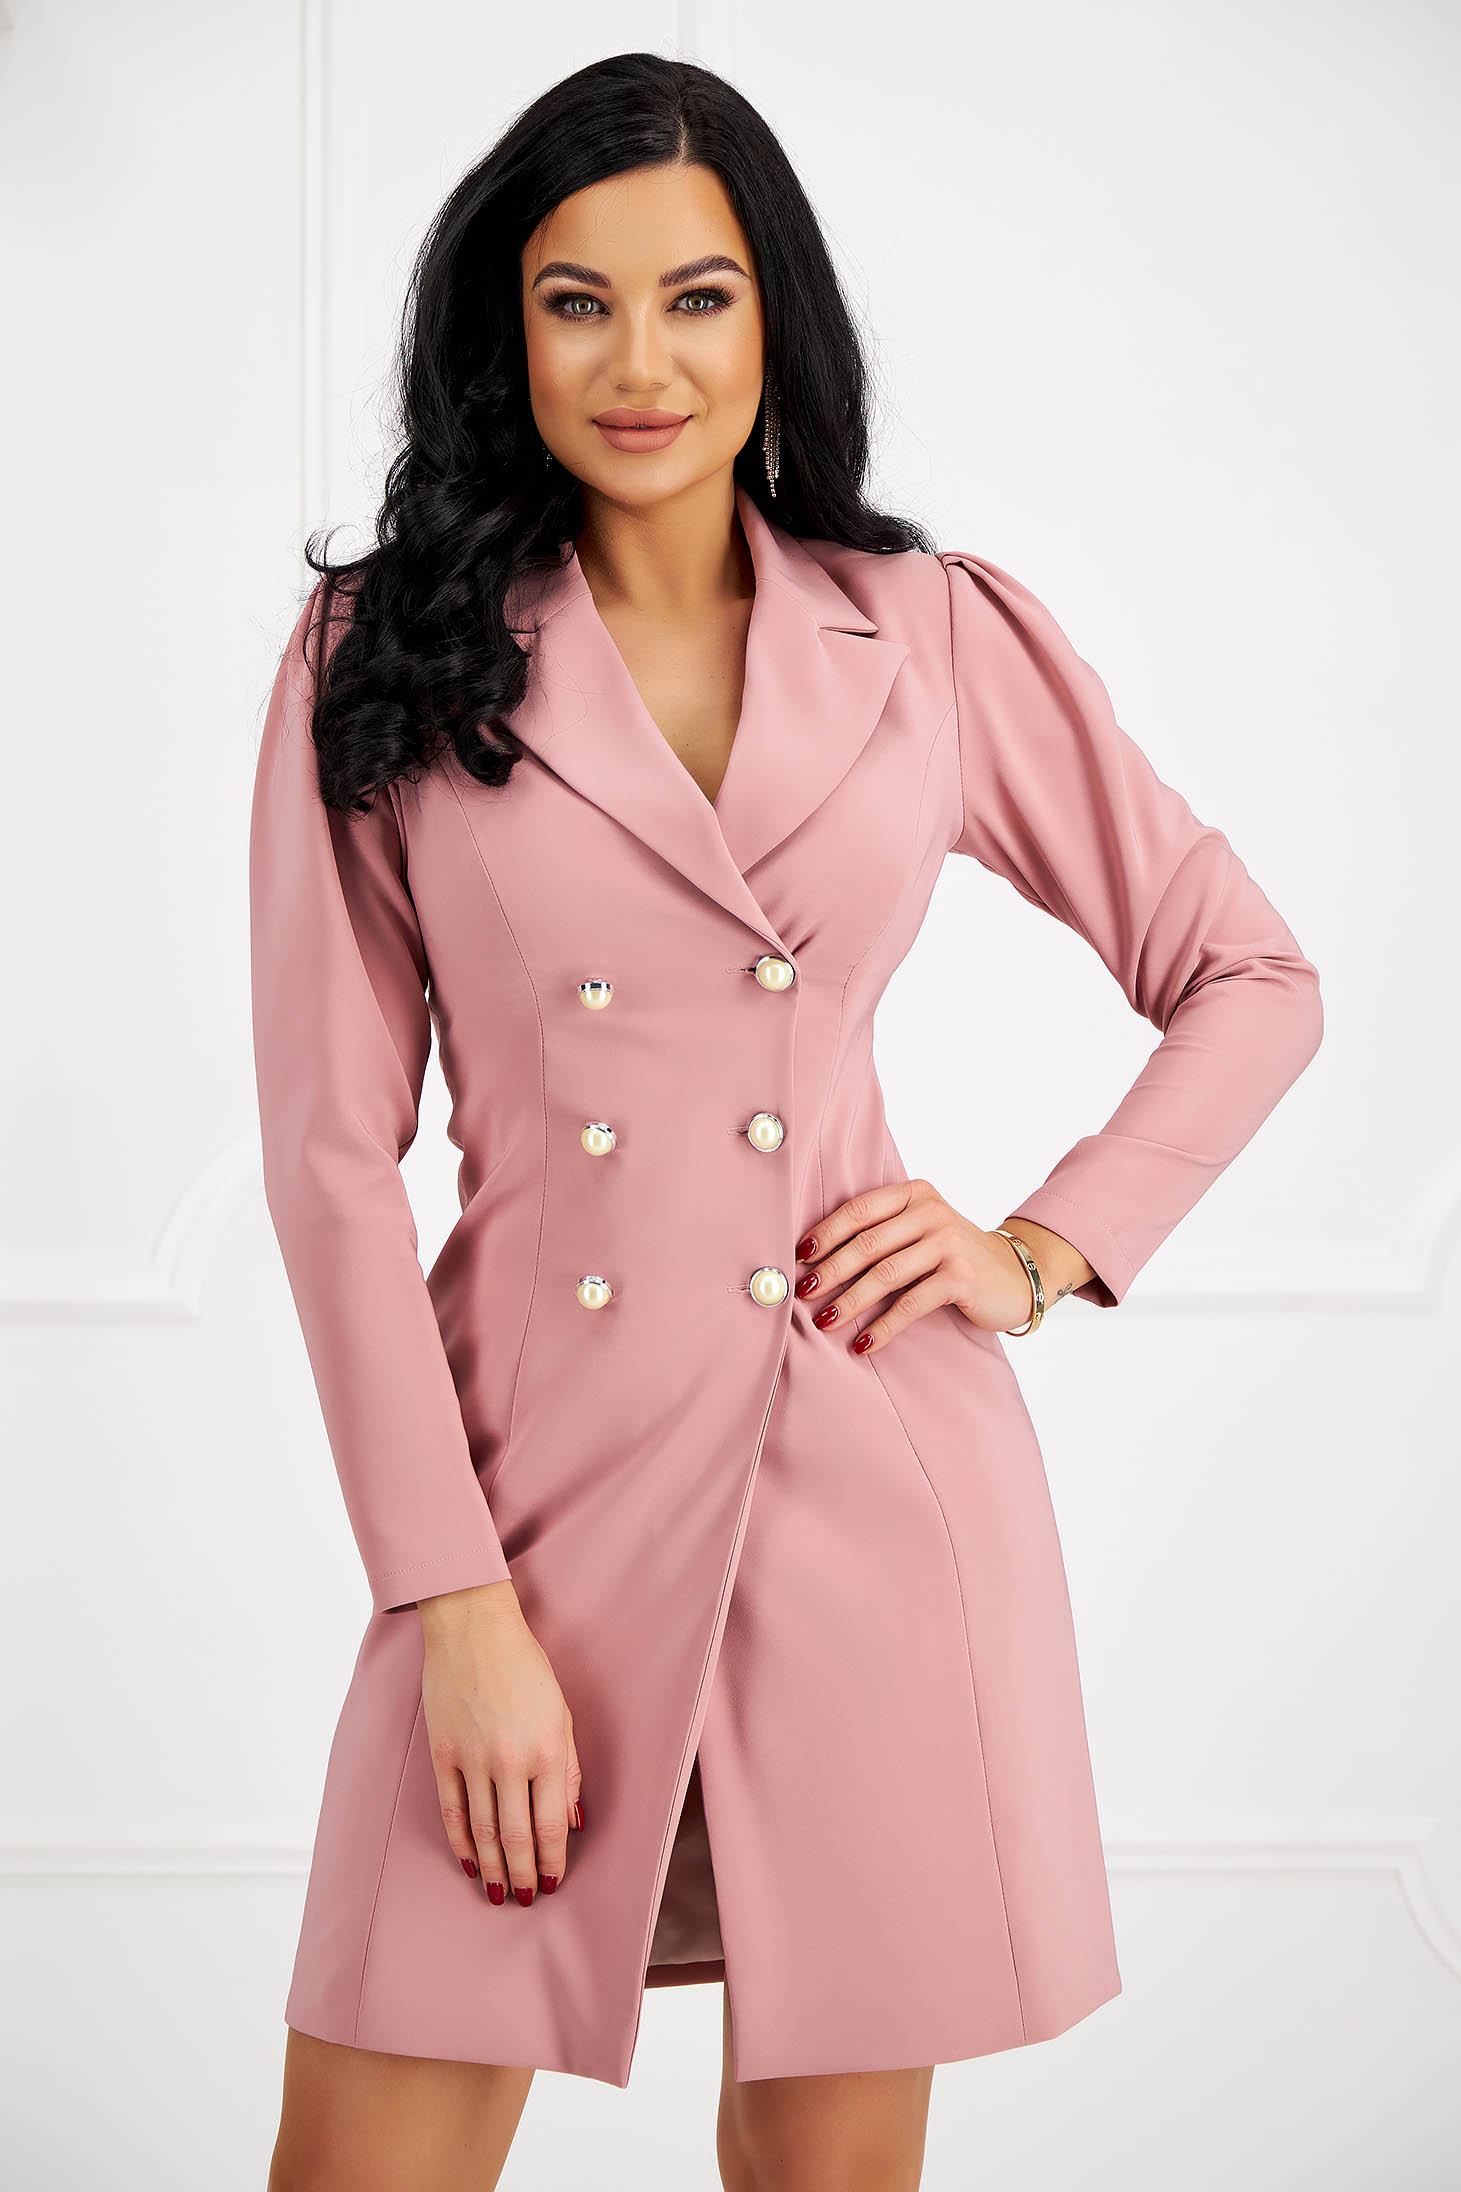 Powder Pink Blazer Dress made of slightly stretchy fabric with decorative buttons and puffy shoulders - StarShinerS 1 - StarShinerS.com